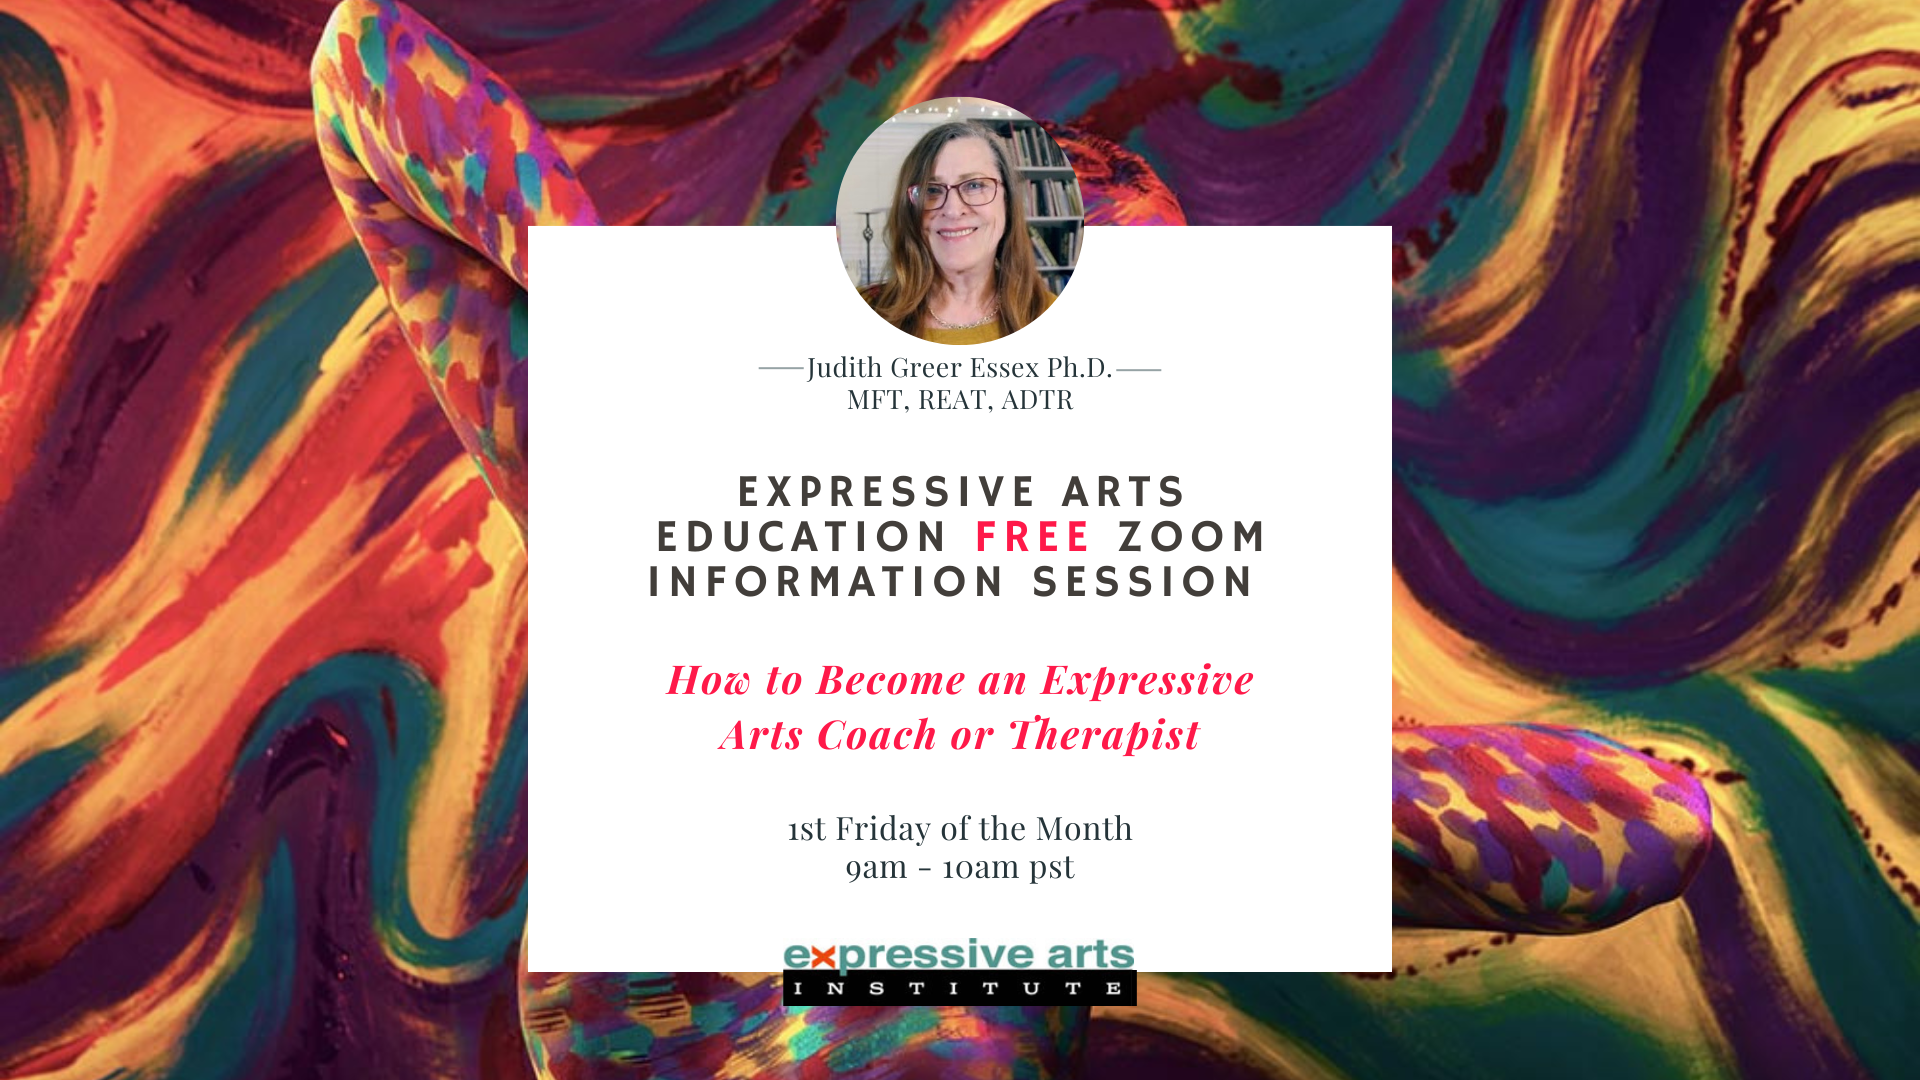 Expressive Arts Education: Free Zoom Information Session w/ Dr. Judith Greer Essex